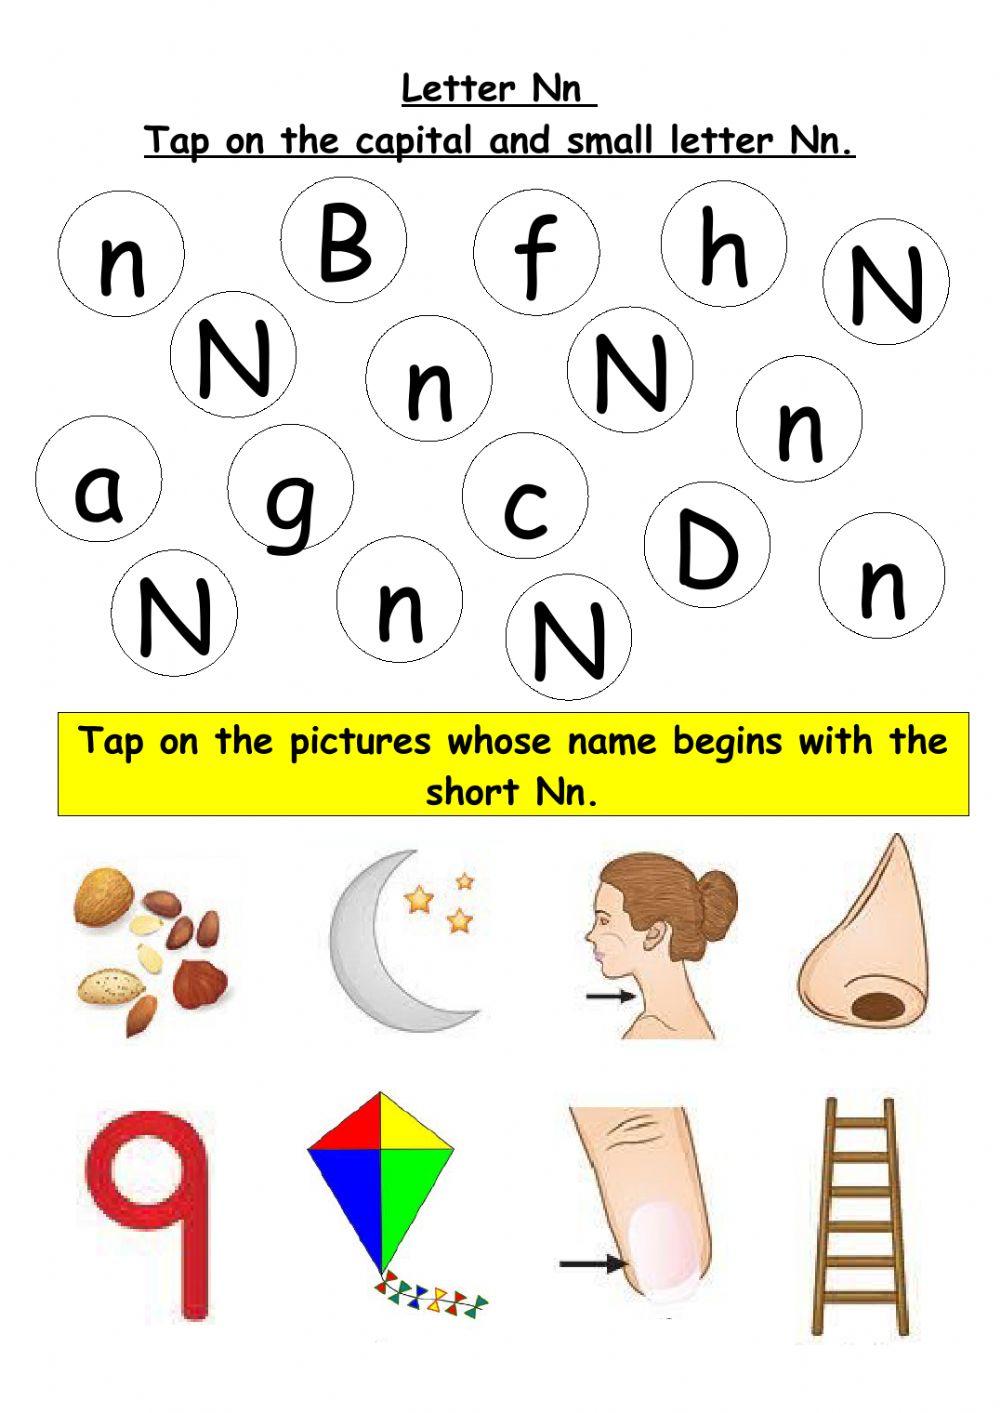 Tap on the capital and small letter Nn